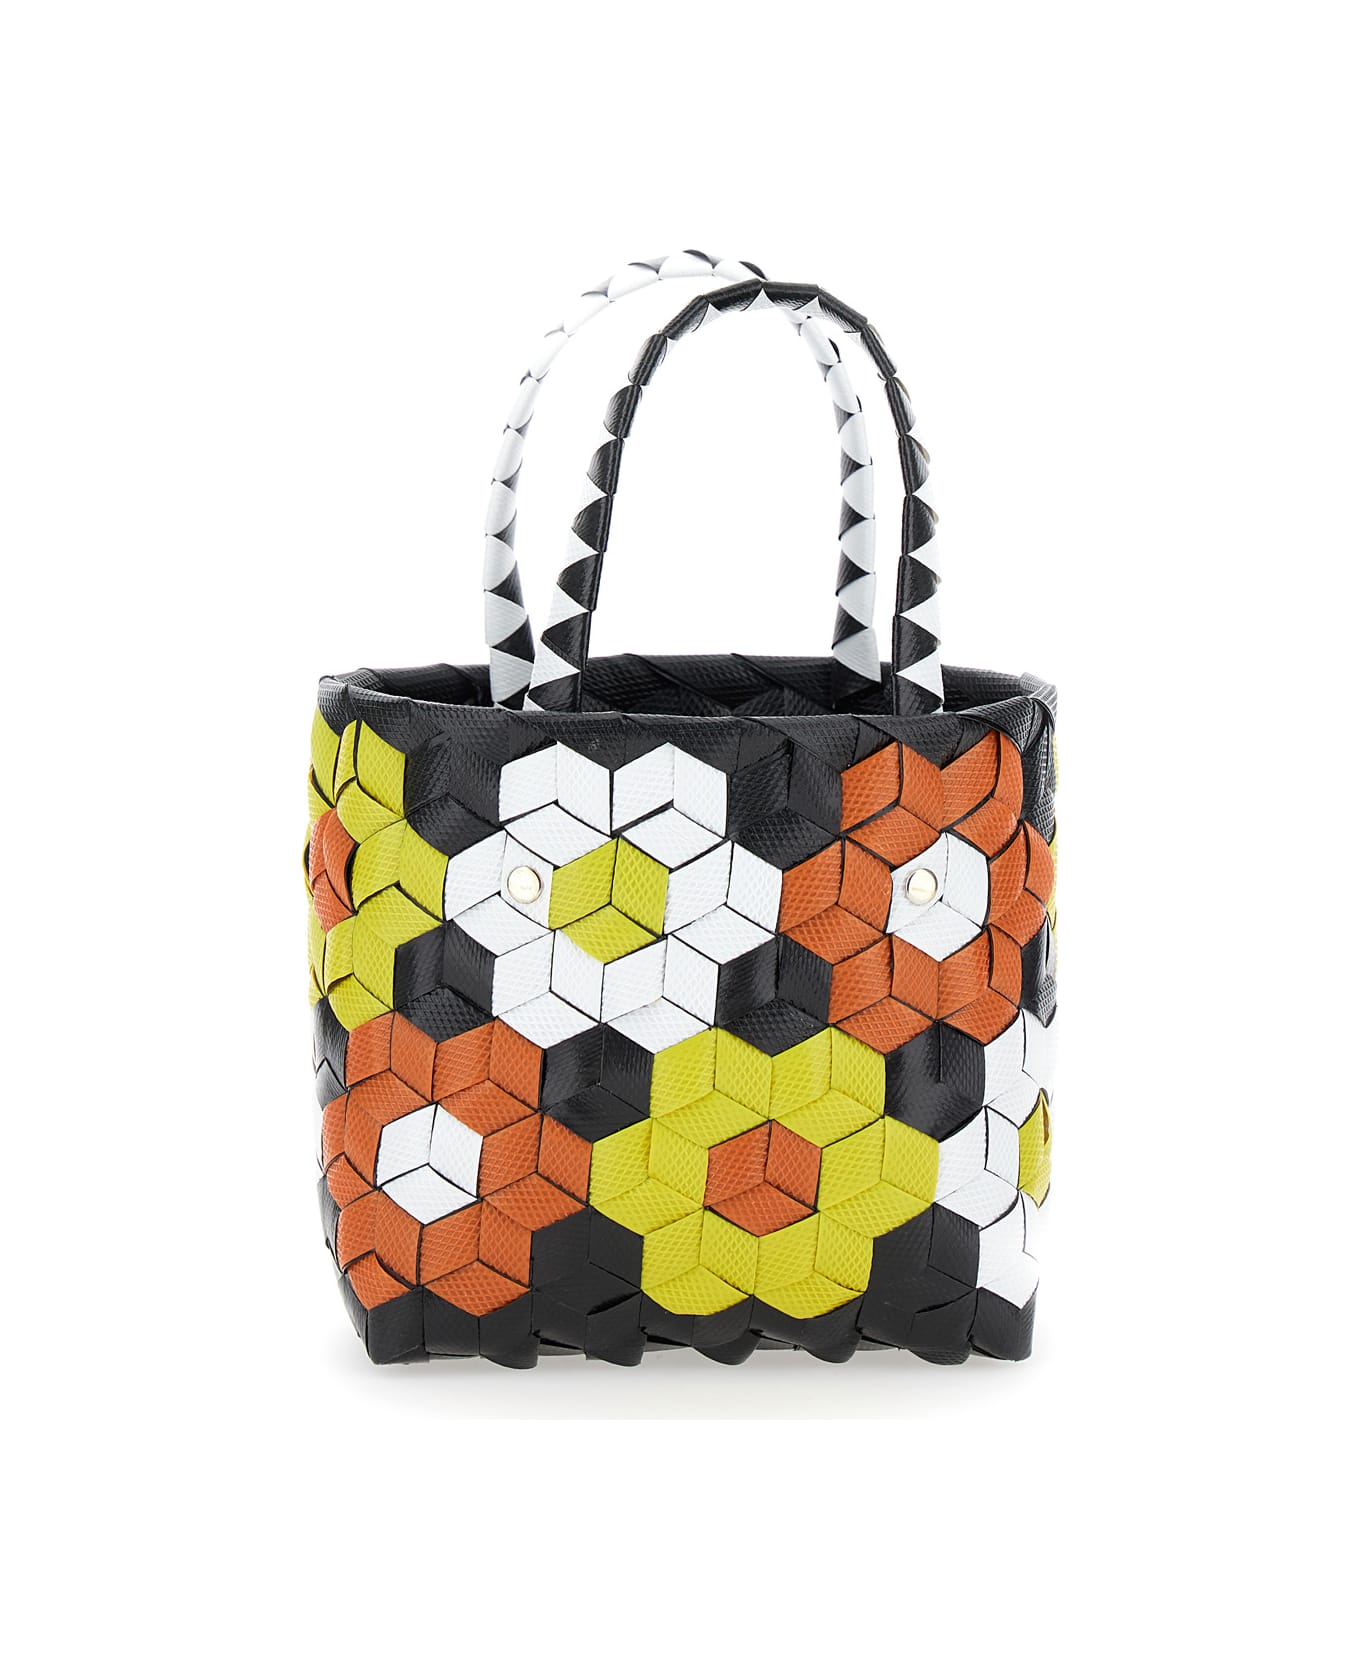 Marni 'sunflower' Multicolor Handbag With Floreal Motif In Braided Fabric Girl - Black アクセサリー＆ギフト